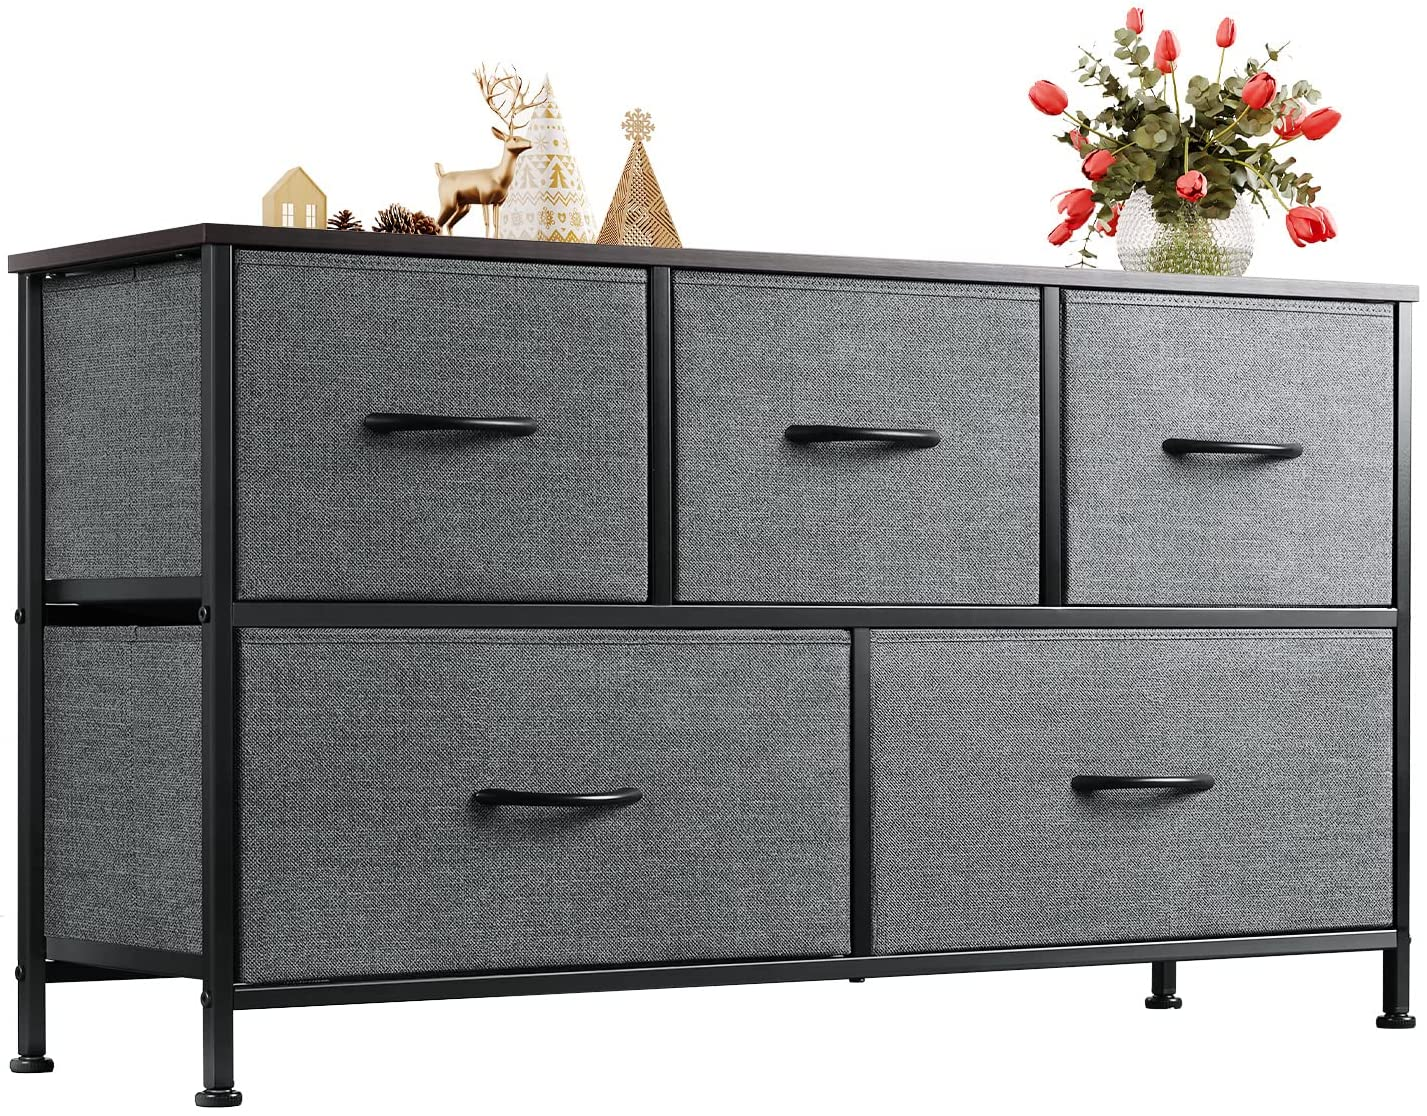 Dresser for Bedroom with 5 Drawers, Wide Chest of Drawers, Fabric Dresser, Storage Organizer Unit with Fabric Bins for Closet, Living Room, Hallway, Nursery, Dark Grey